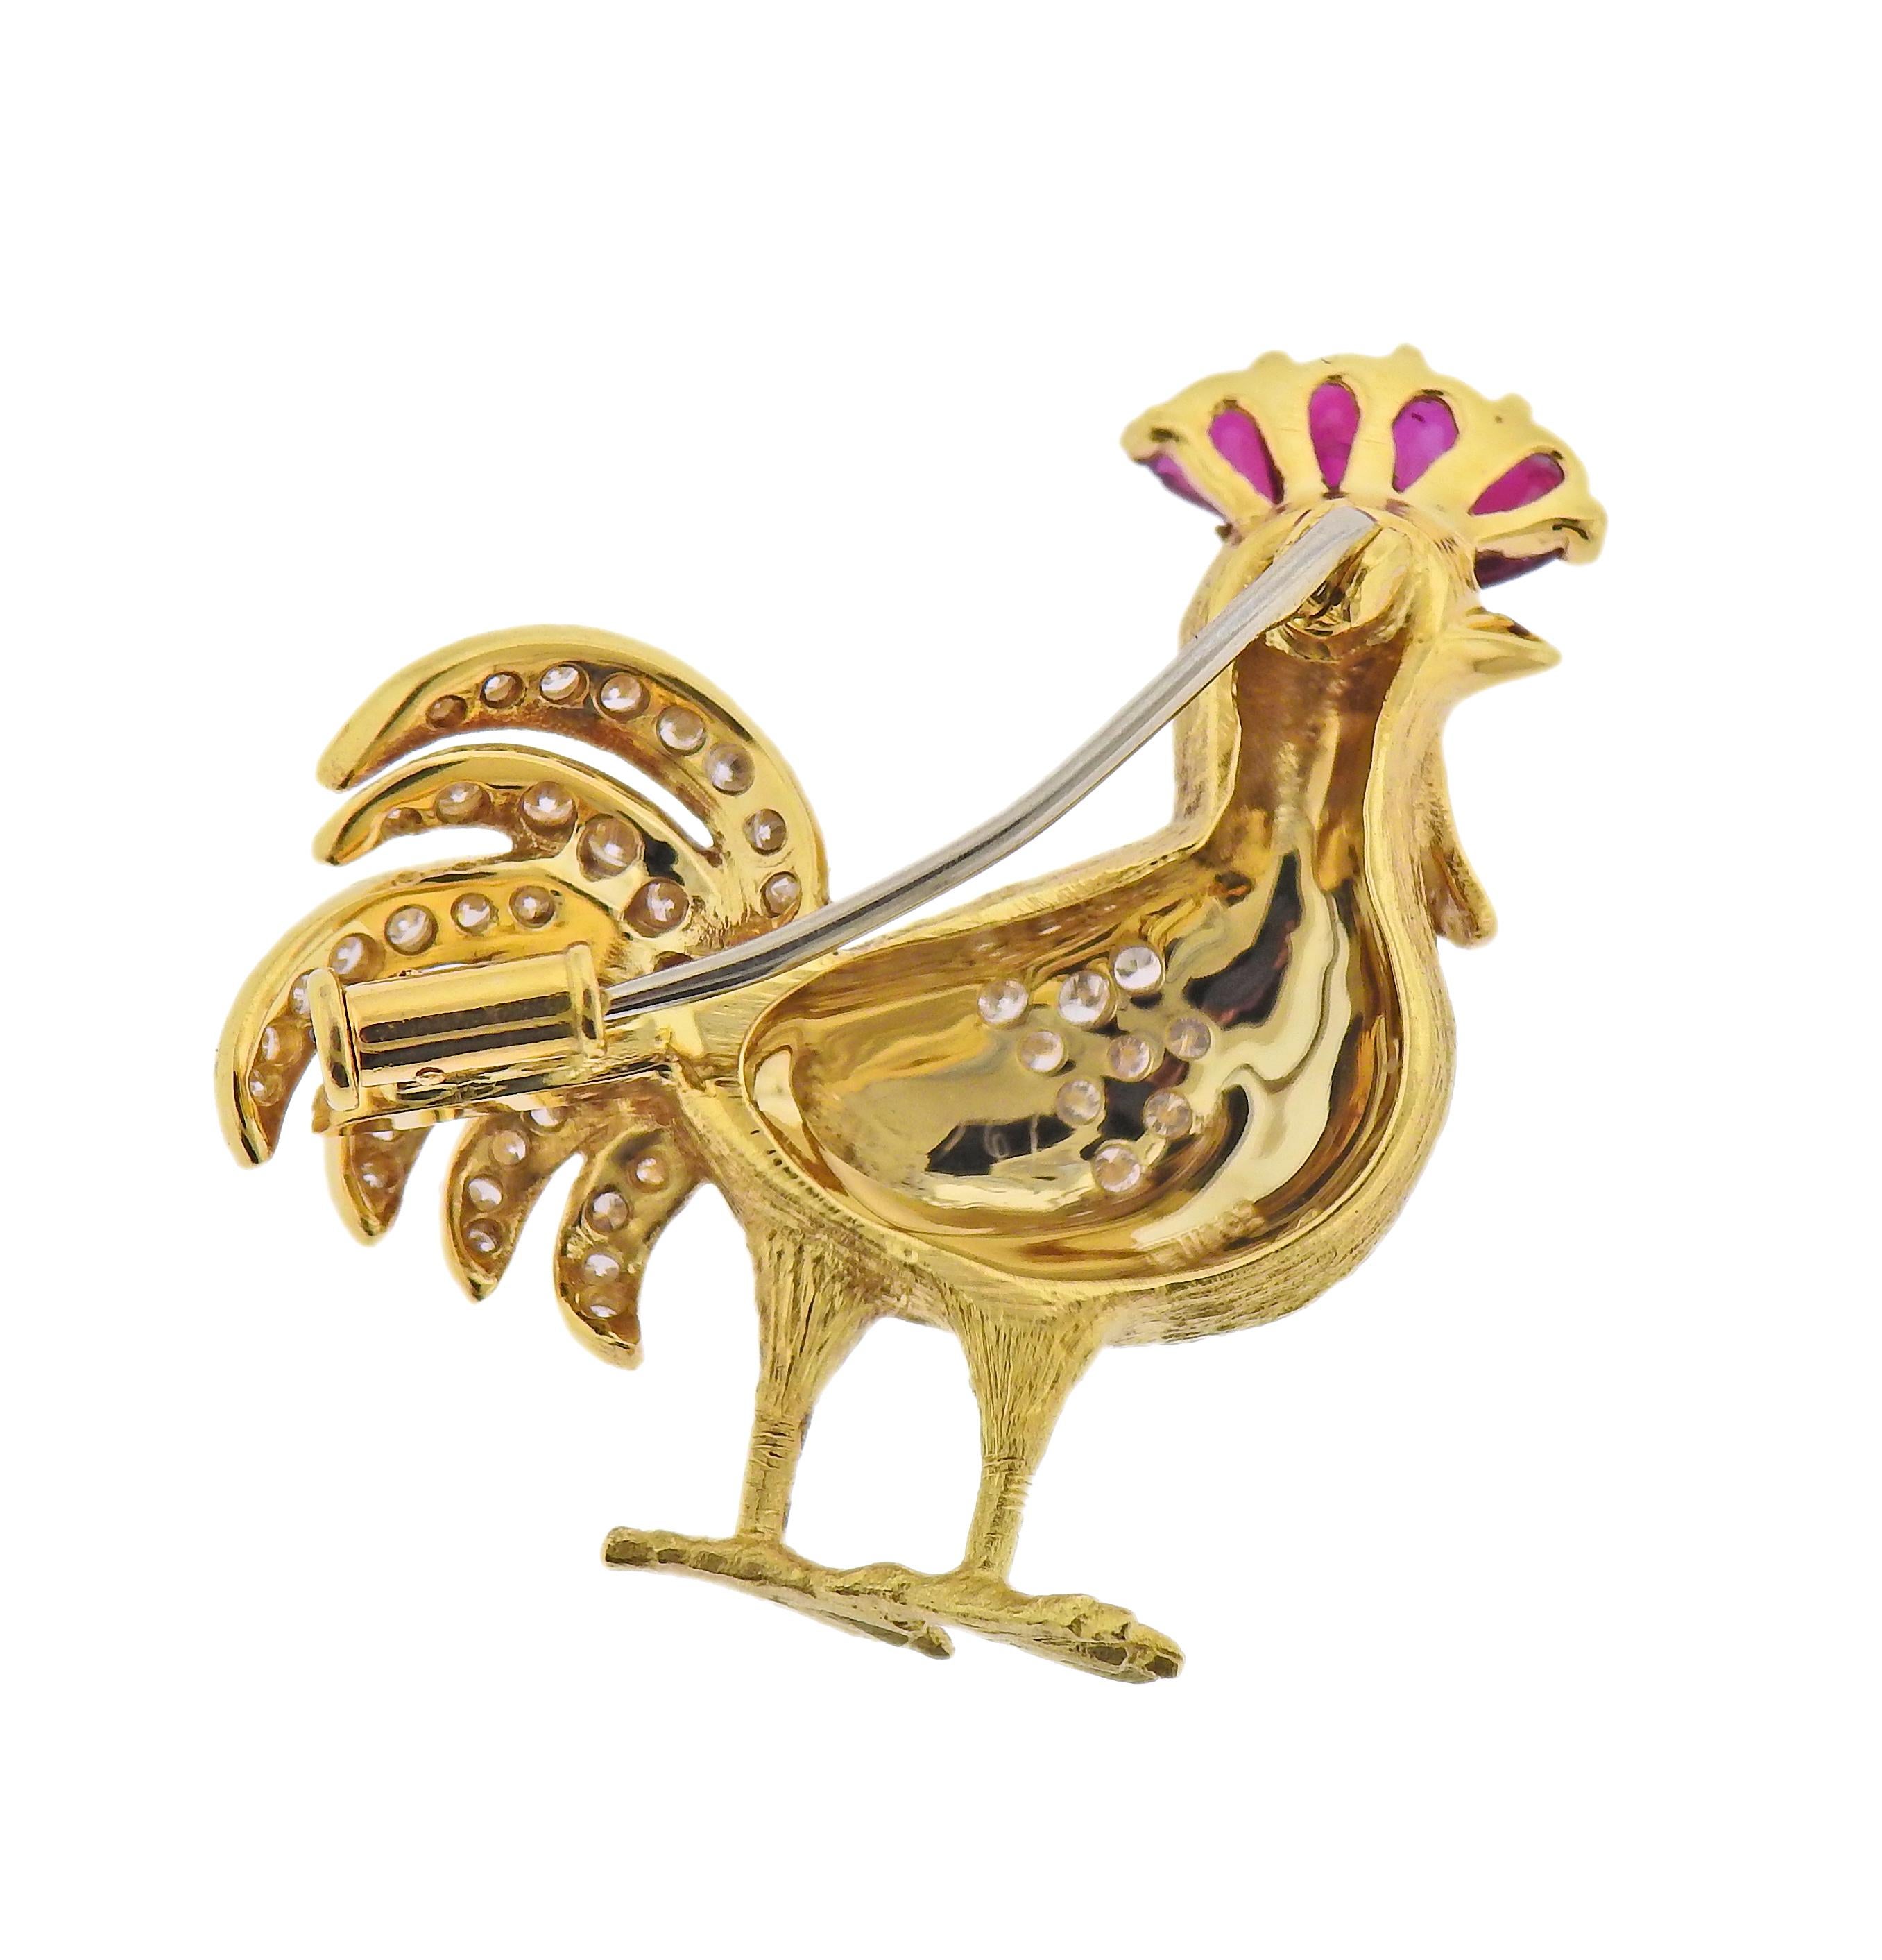 E. Wolfe rooster brooch in 18k gold, adorned with rubies and approx. 0.22ctw in diamonds. Brooch measures 32mm x 30mm. Marked: EW & Co., 750. Weight - 10.3 grams. 